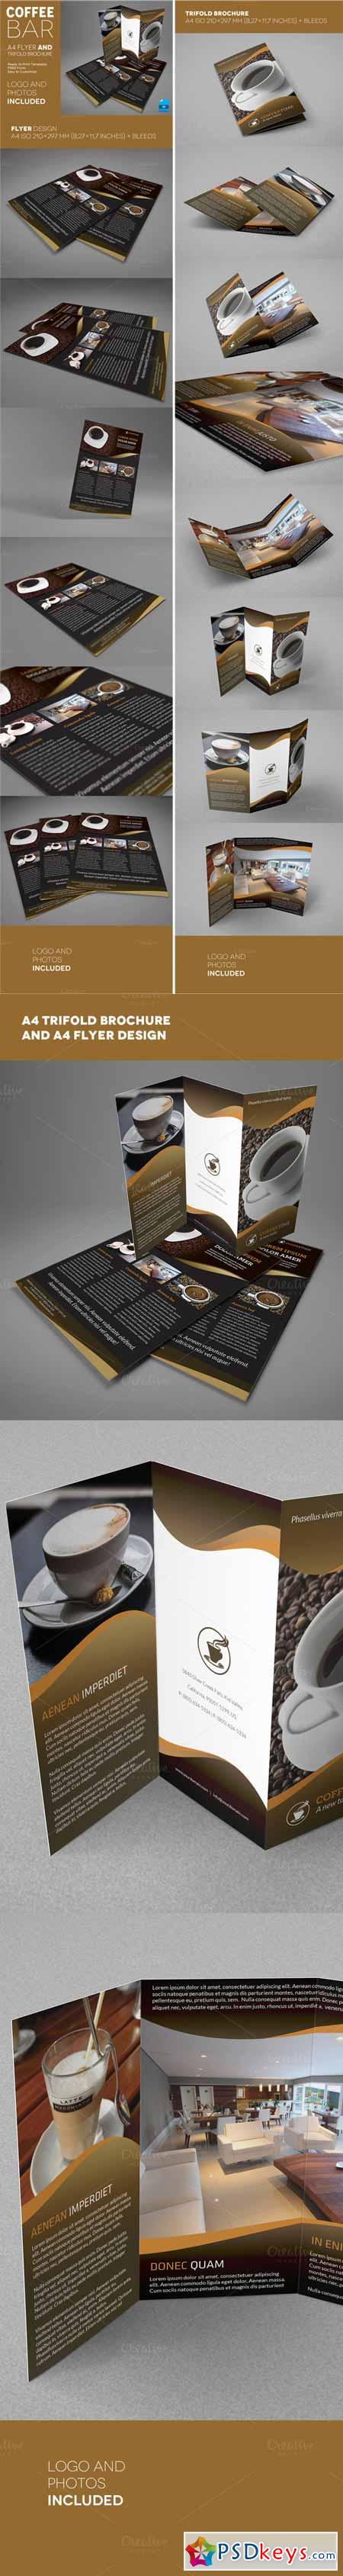 Coffee A4 Trifold brochure and Flyer 275844